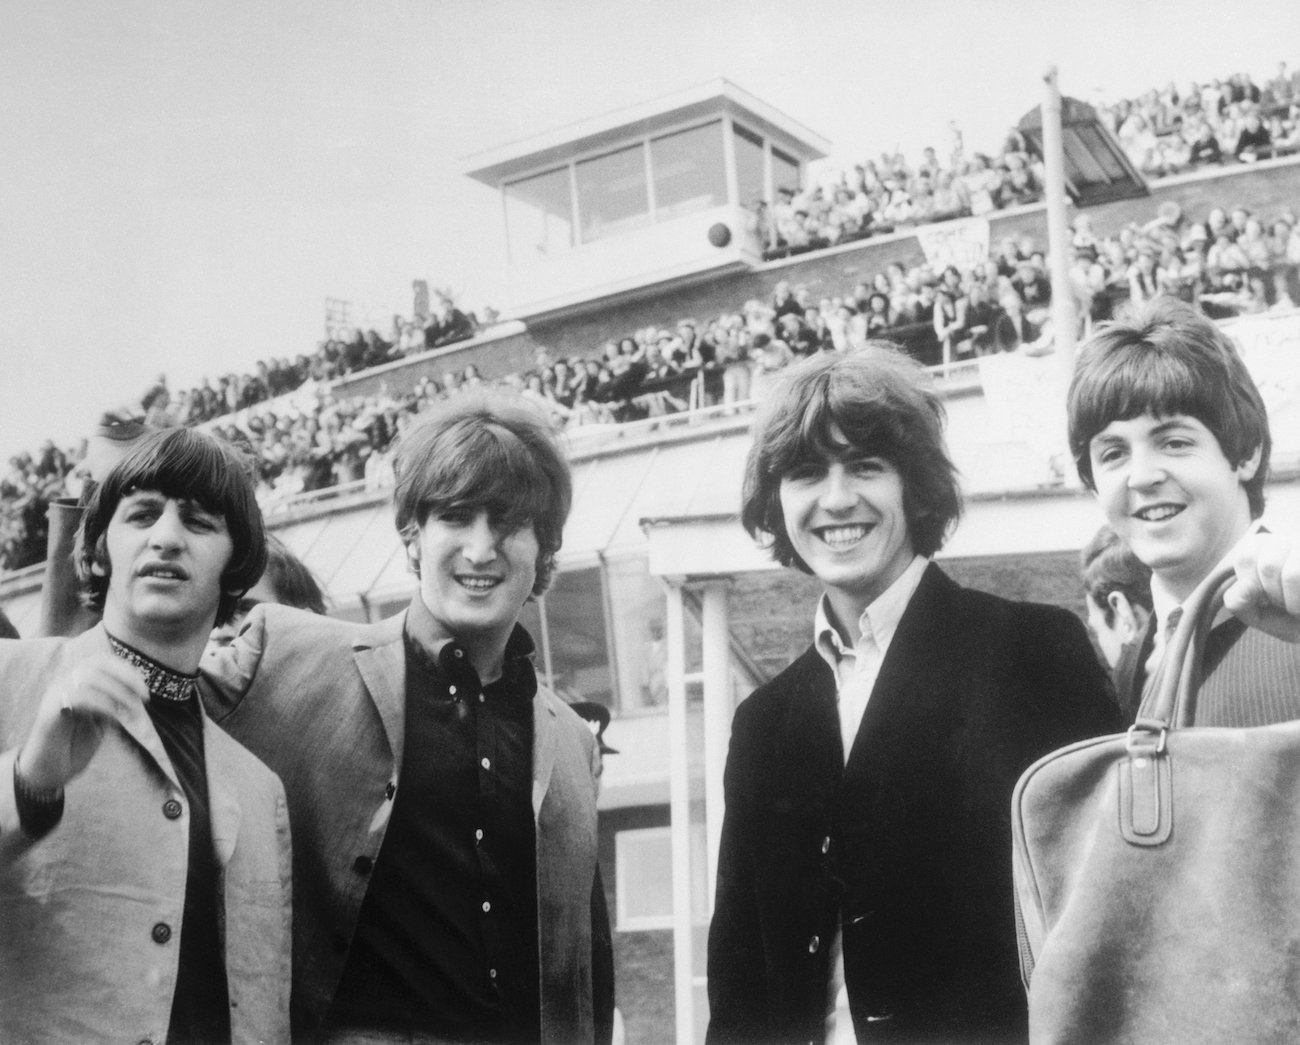 The Beatles, including George Harrison, coming back to England in 1965.